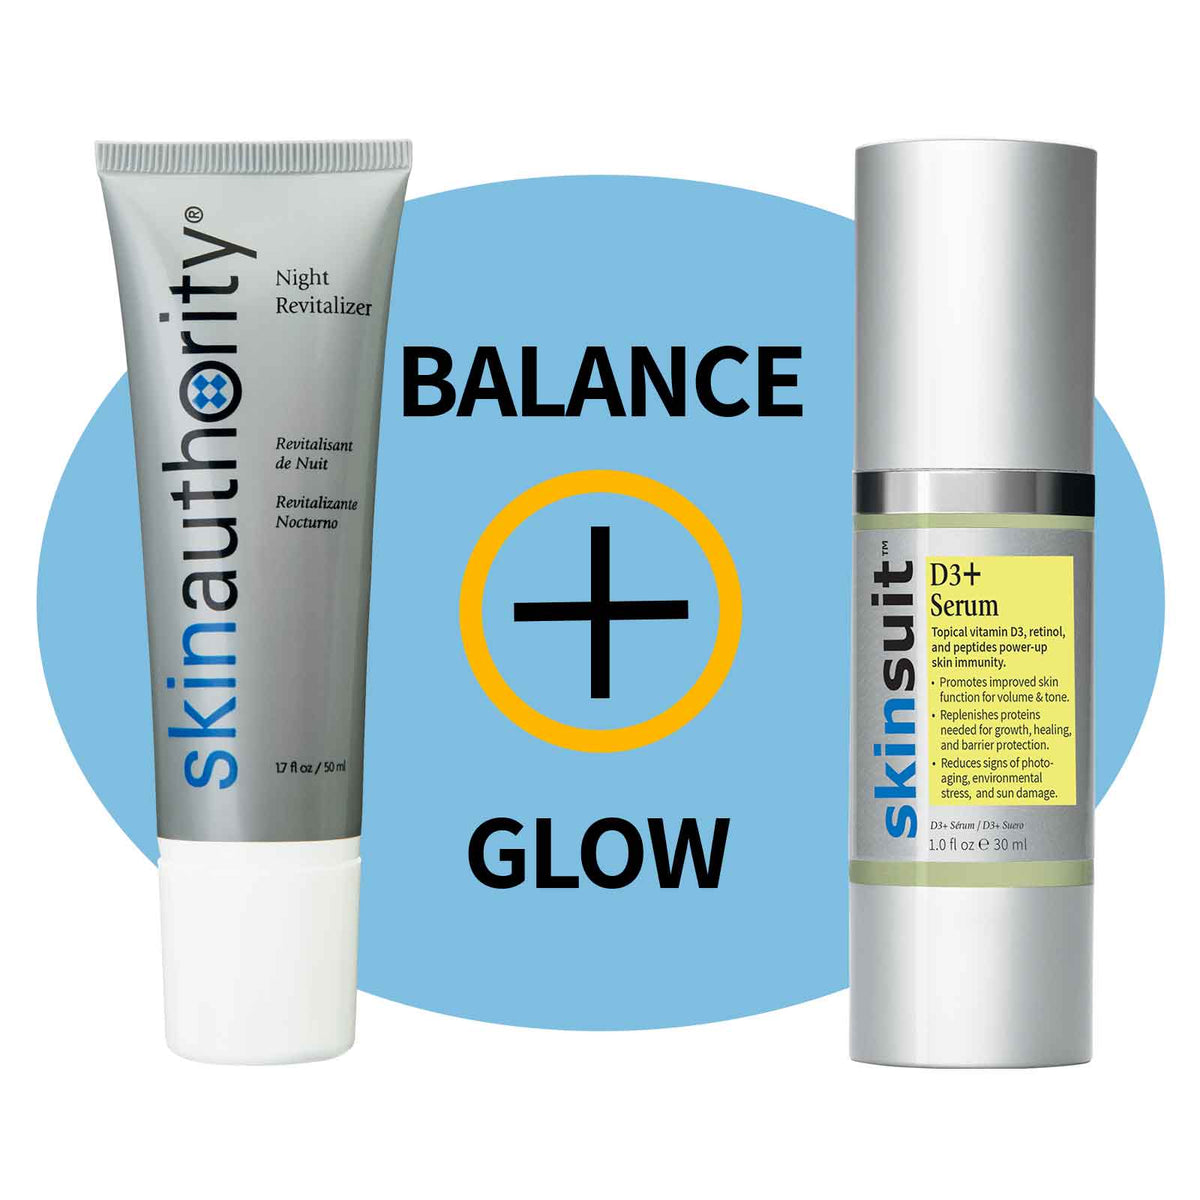 Night Revitalizer and D3+ Serum for Glowing Skin